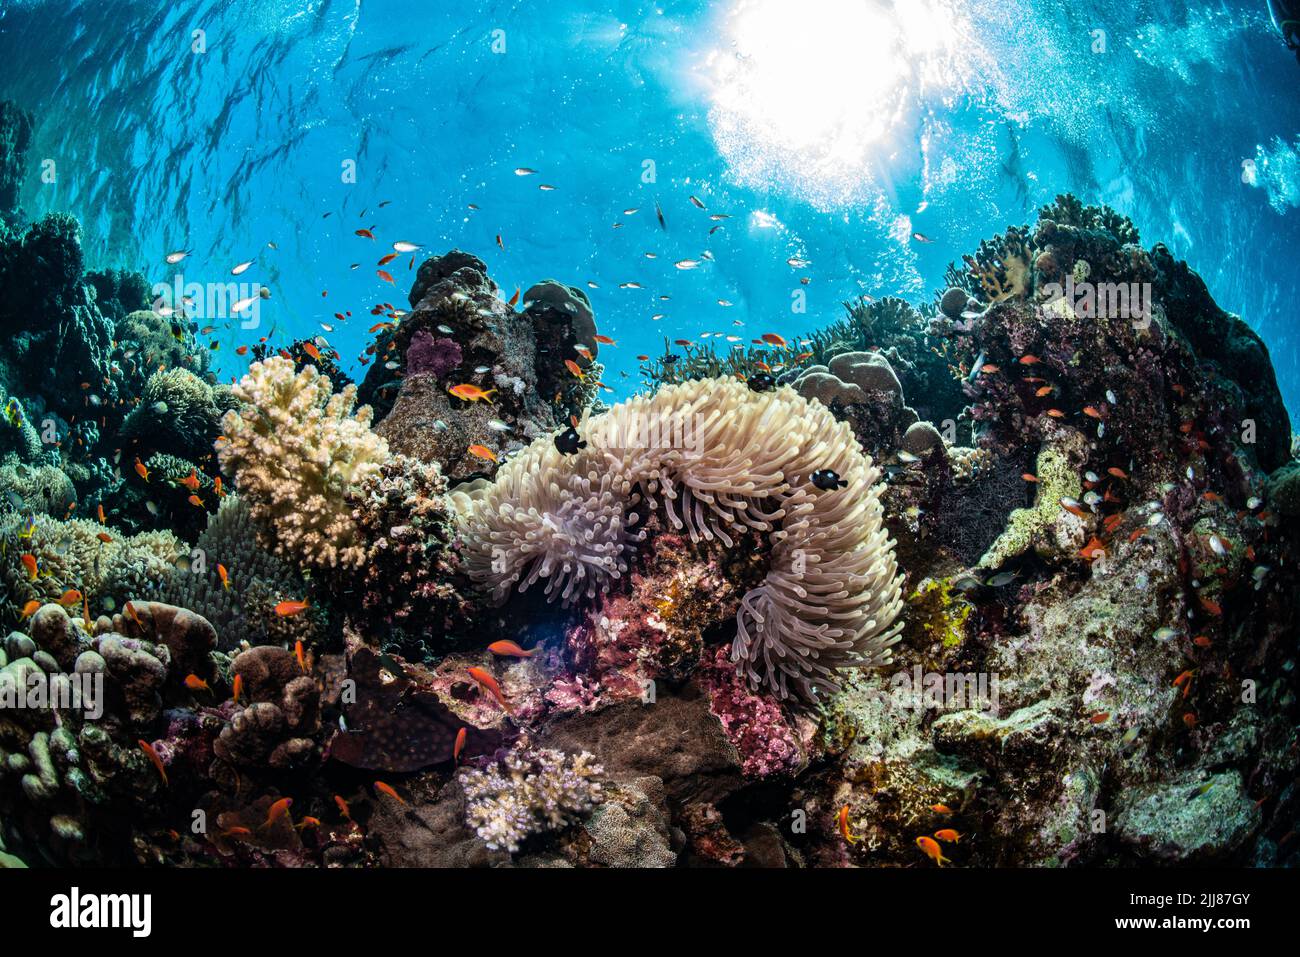 Coral reef scenery Stock Photo